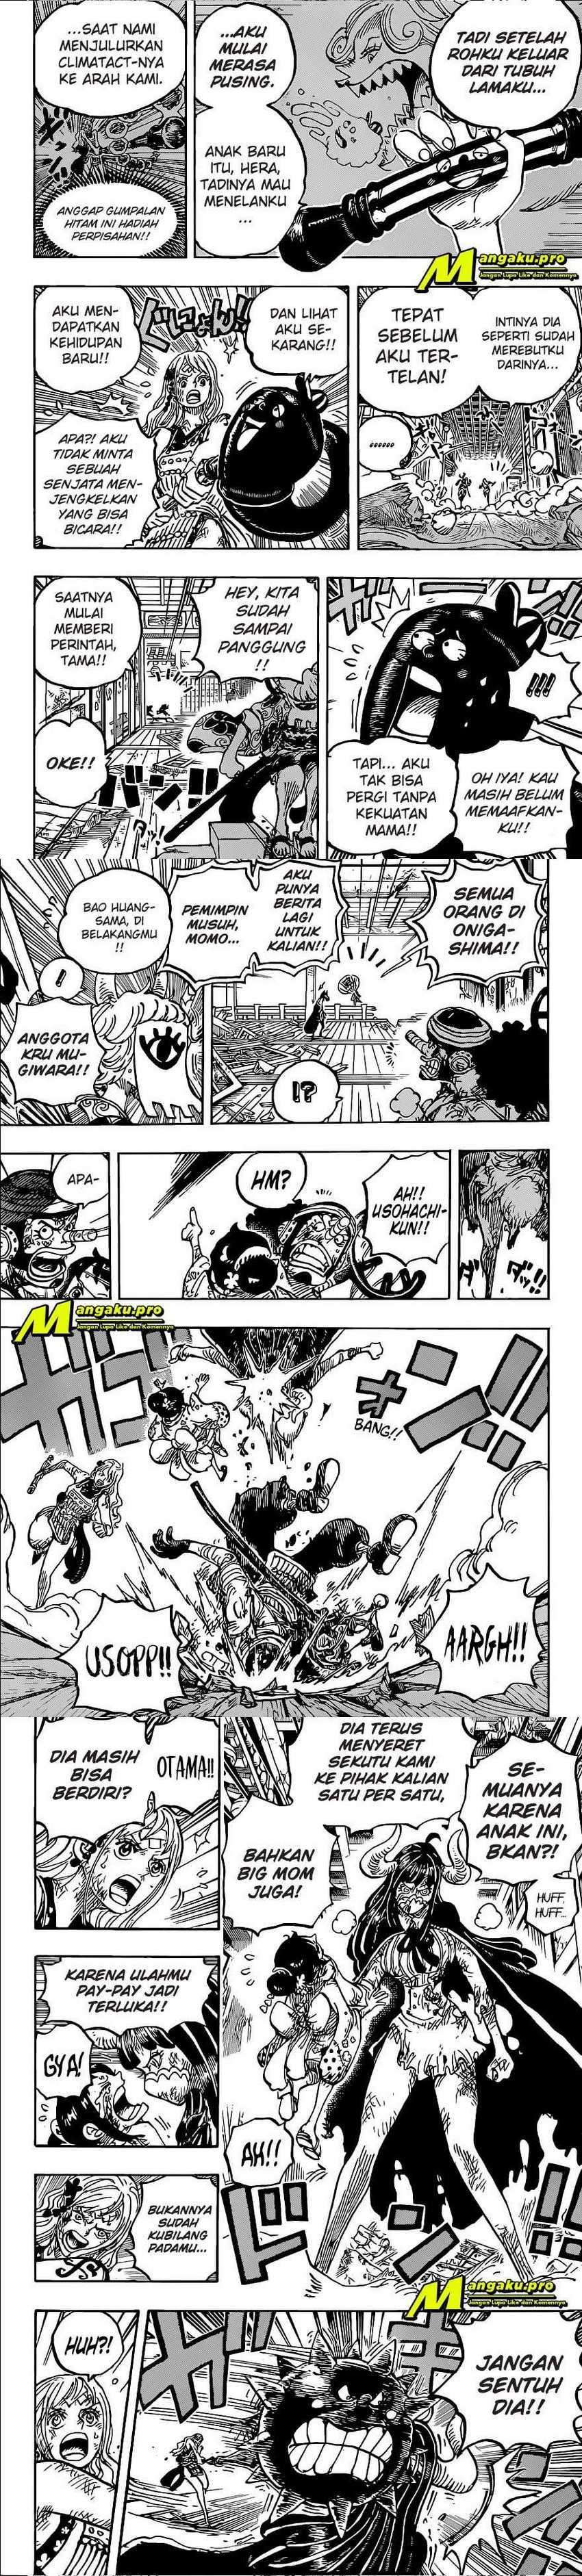 One Piece Chapter 1016 Hq - 33